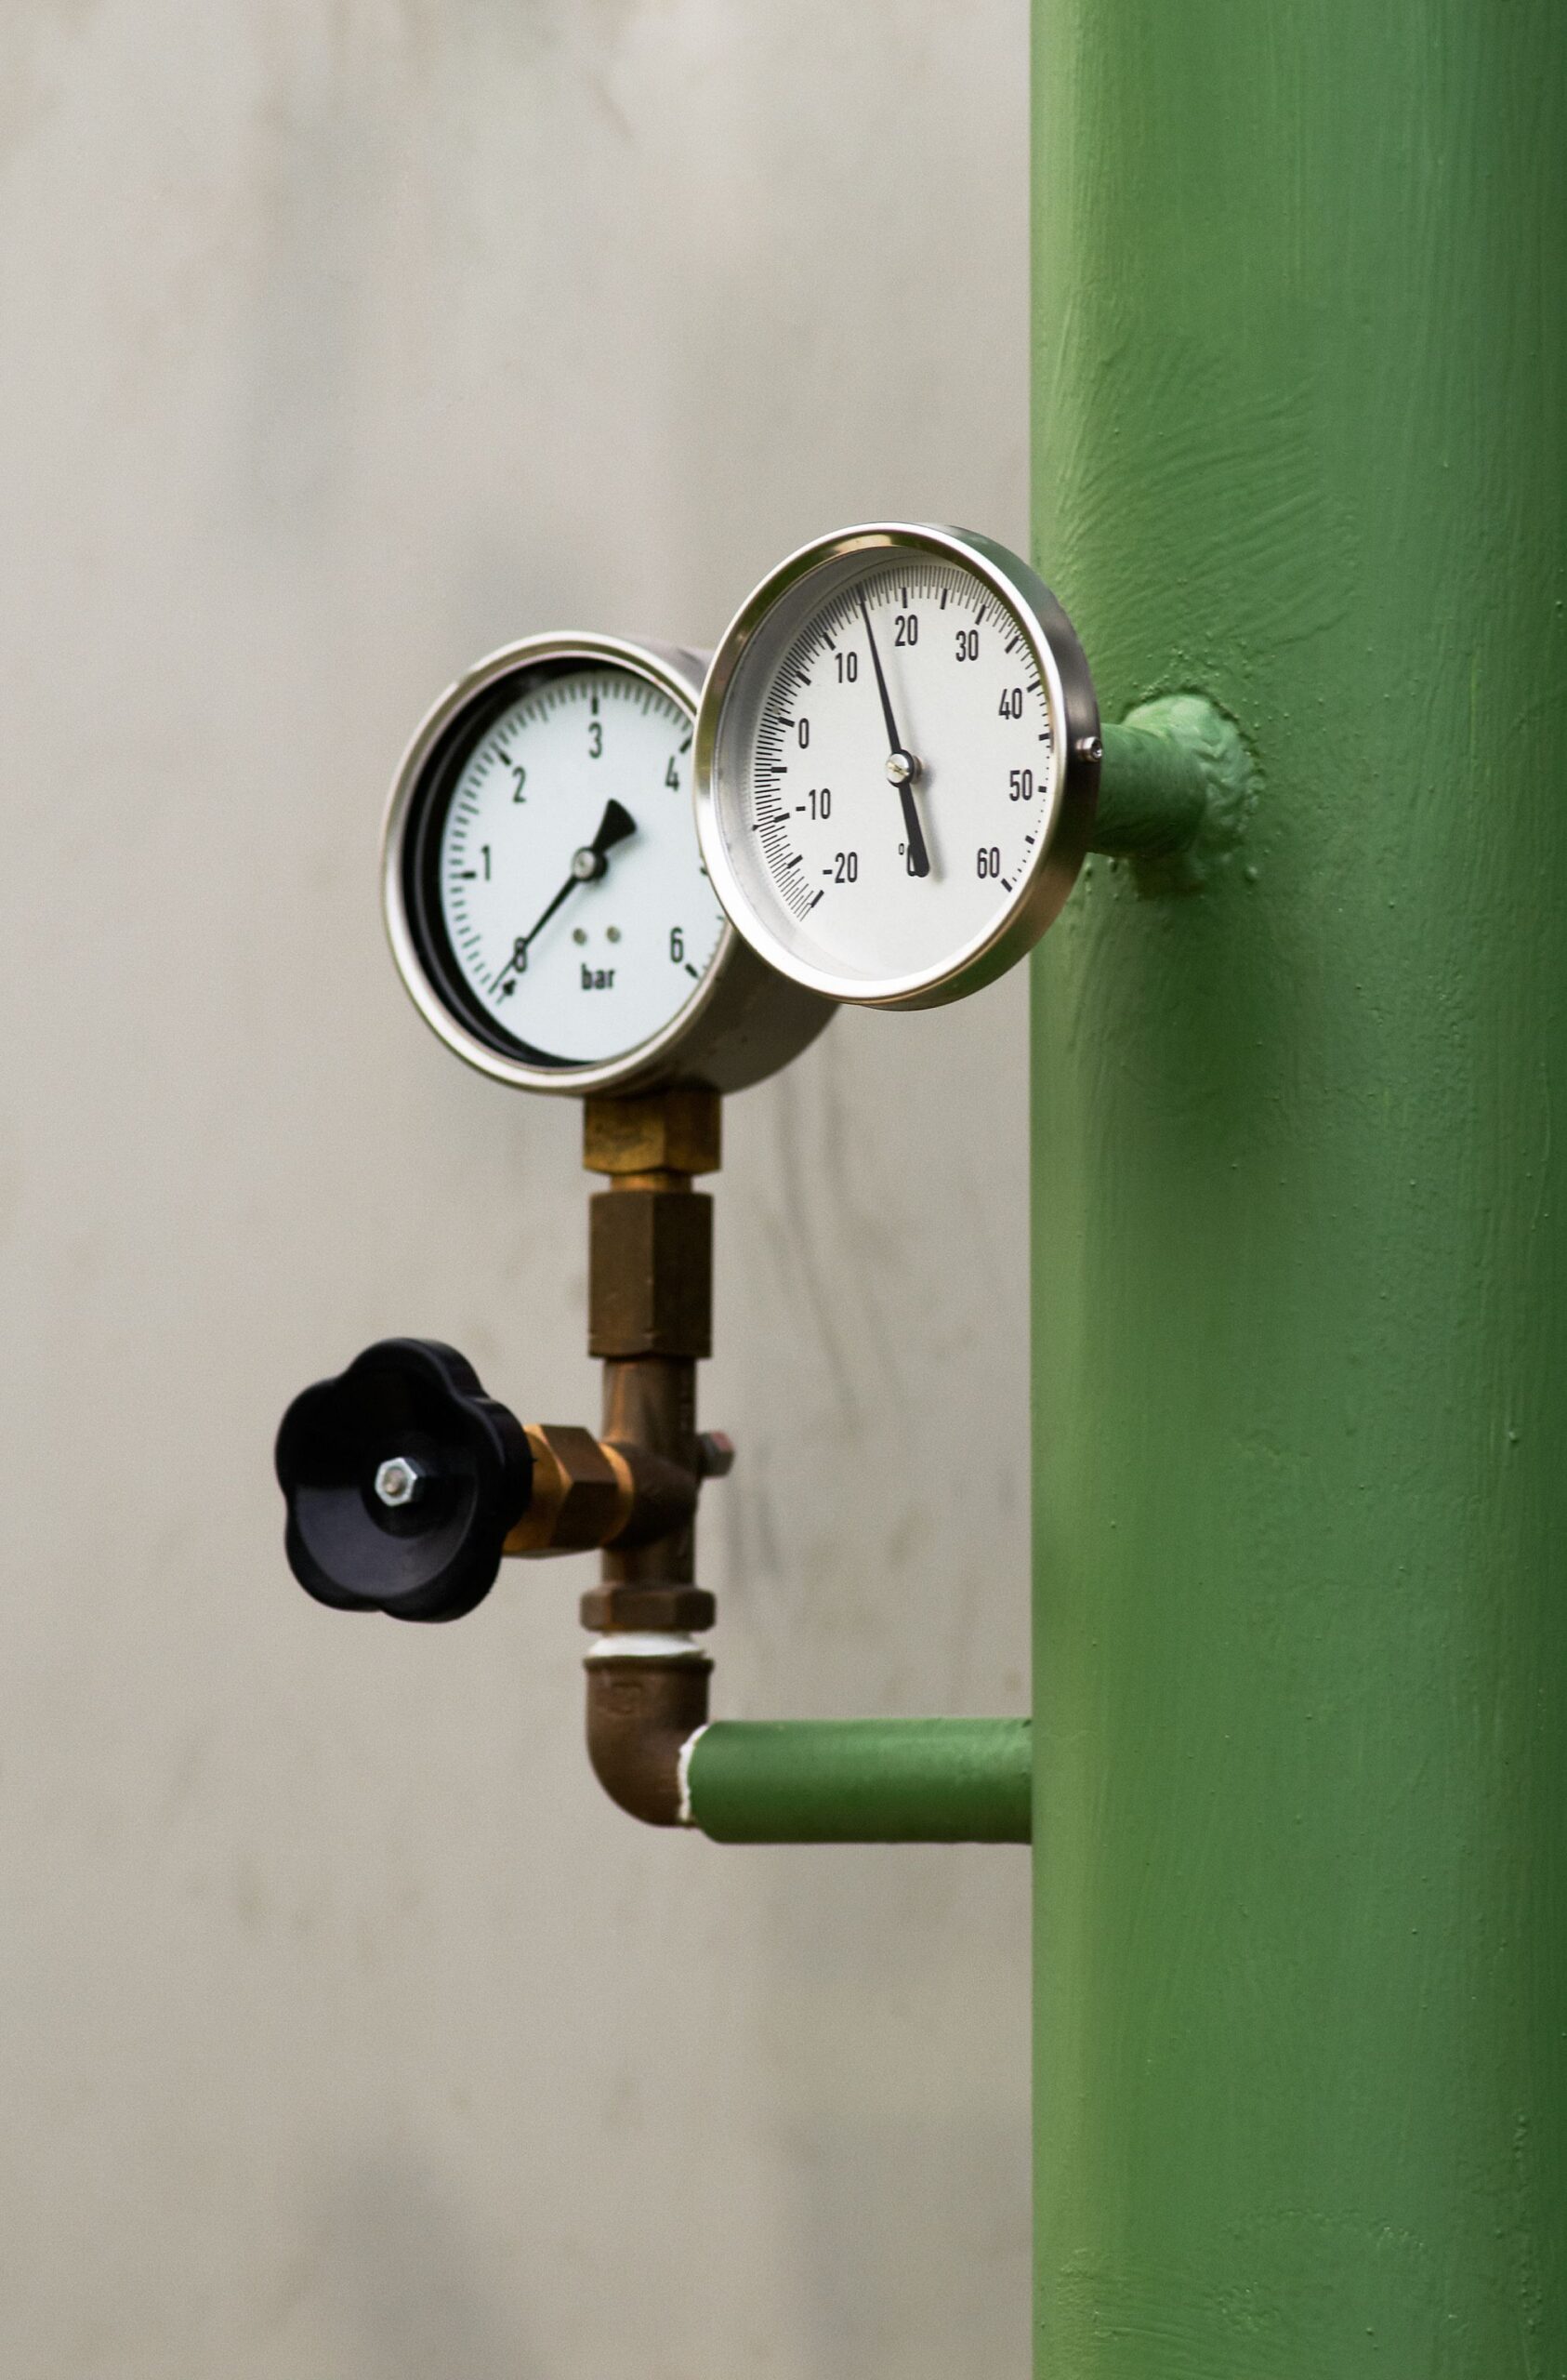 Why Should You Release Pressure from the Water Heater